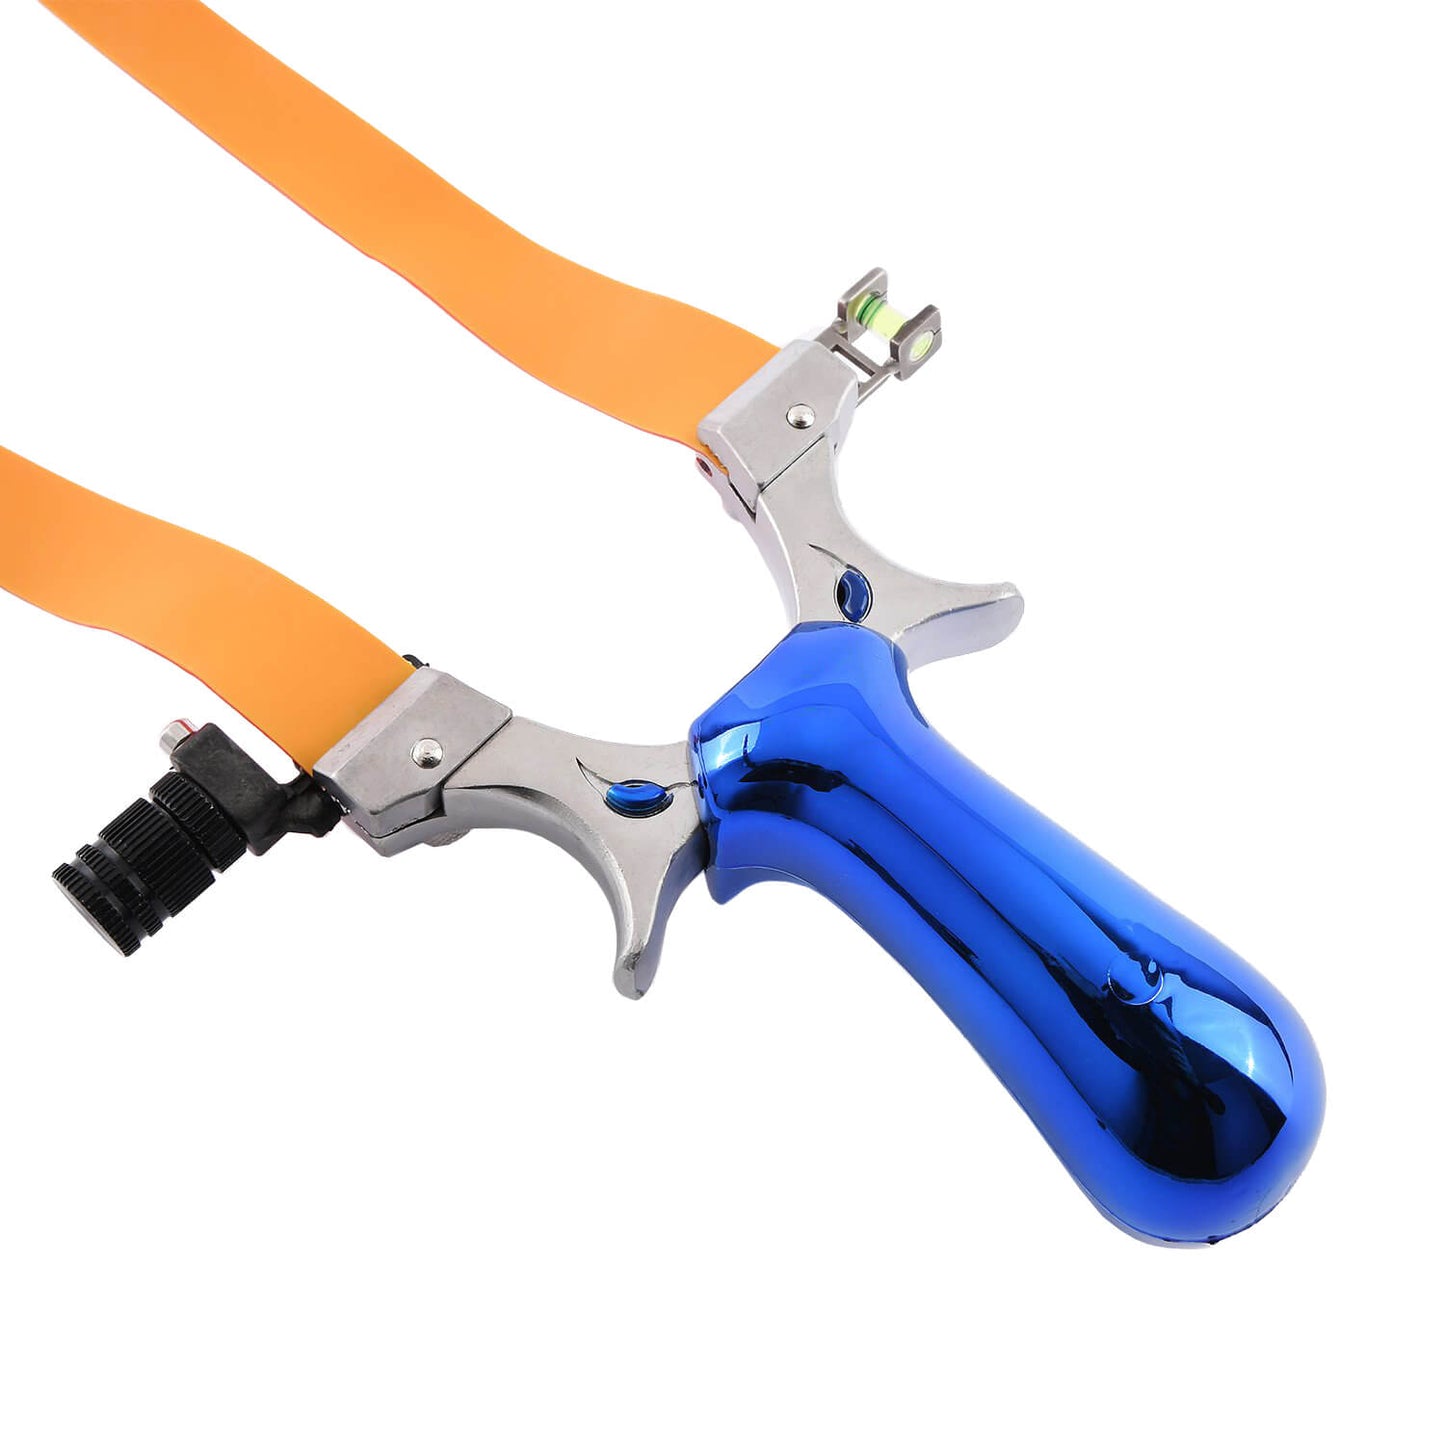 Ballista 24 blue tactical slingshot featuring a leveling instrument for precise aiming, and 3 LR41 batteries.